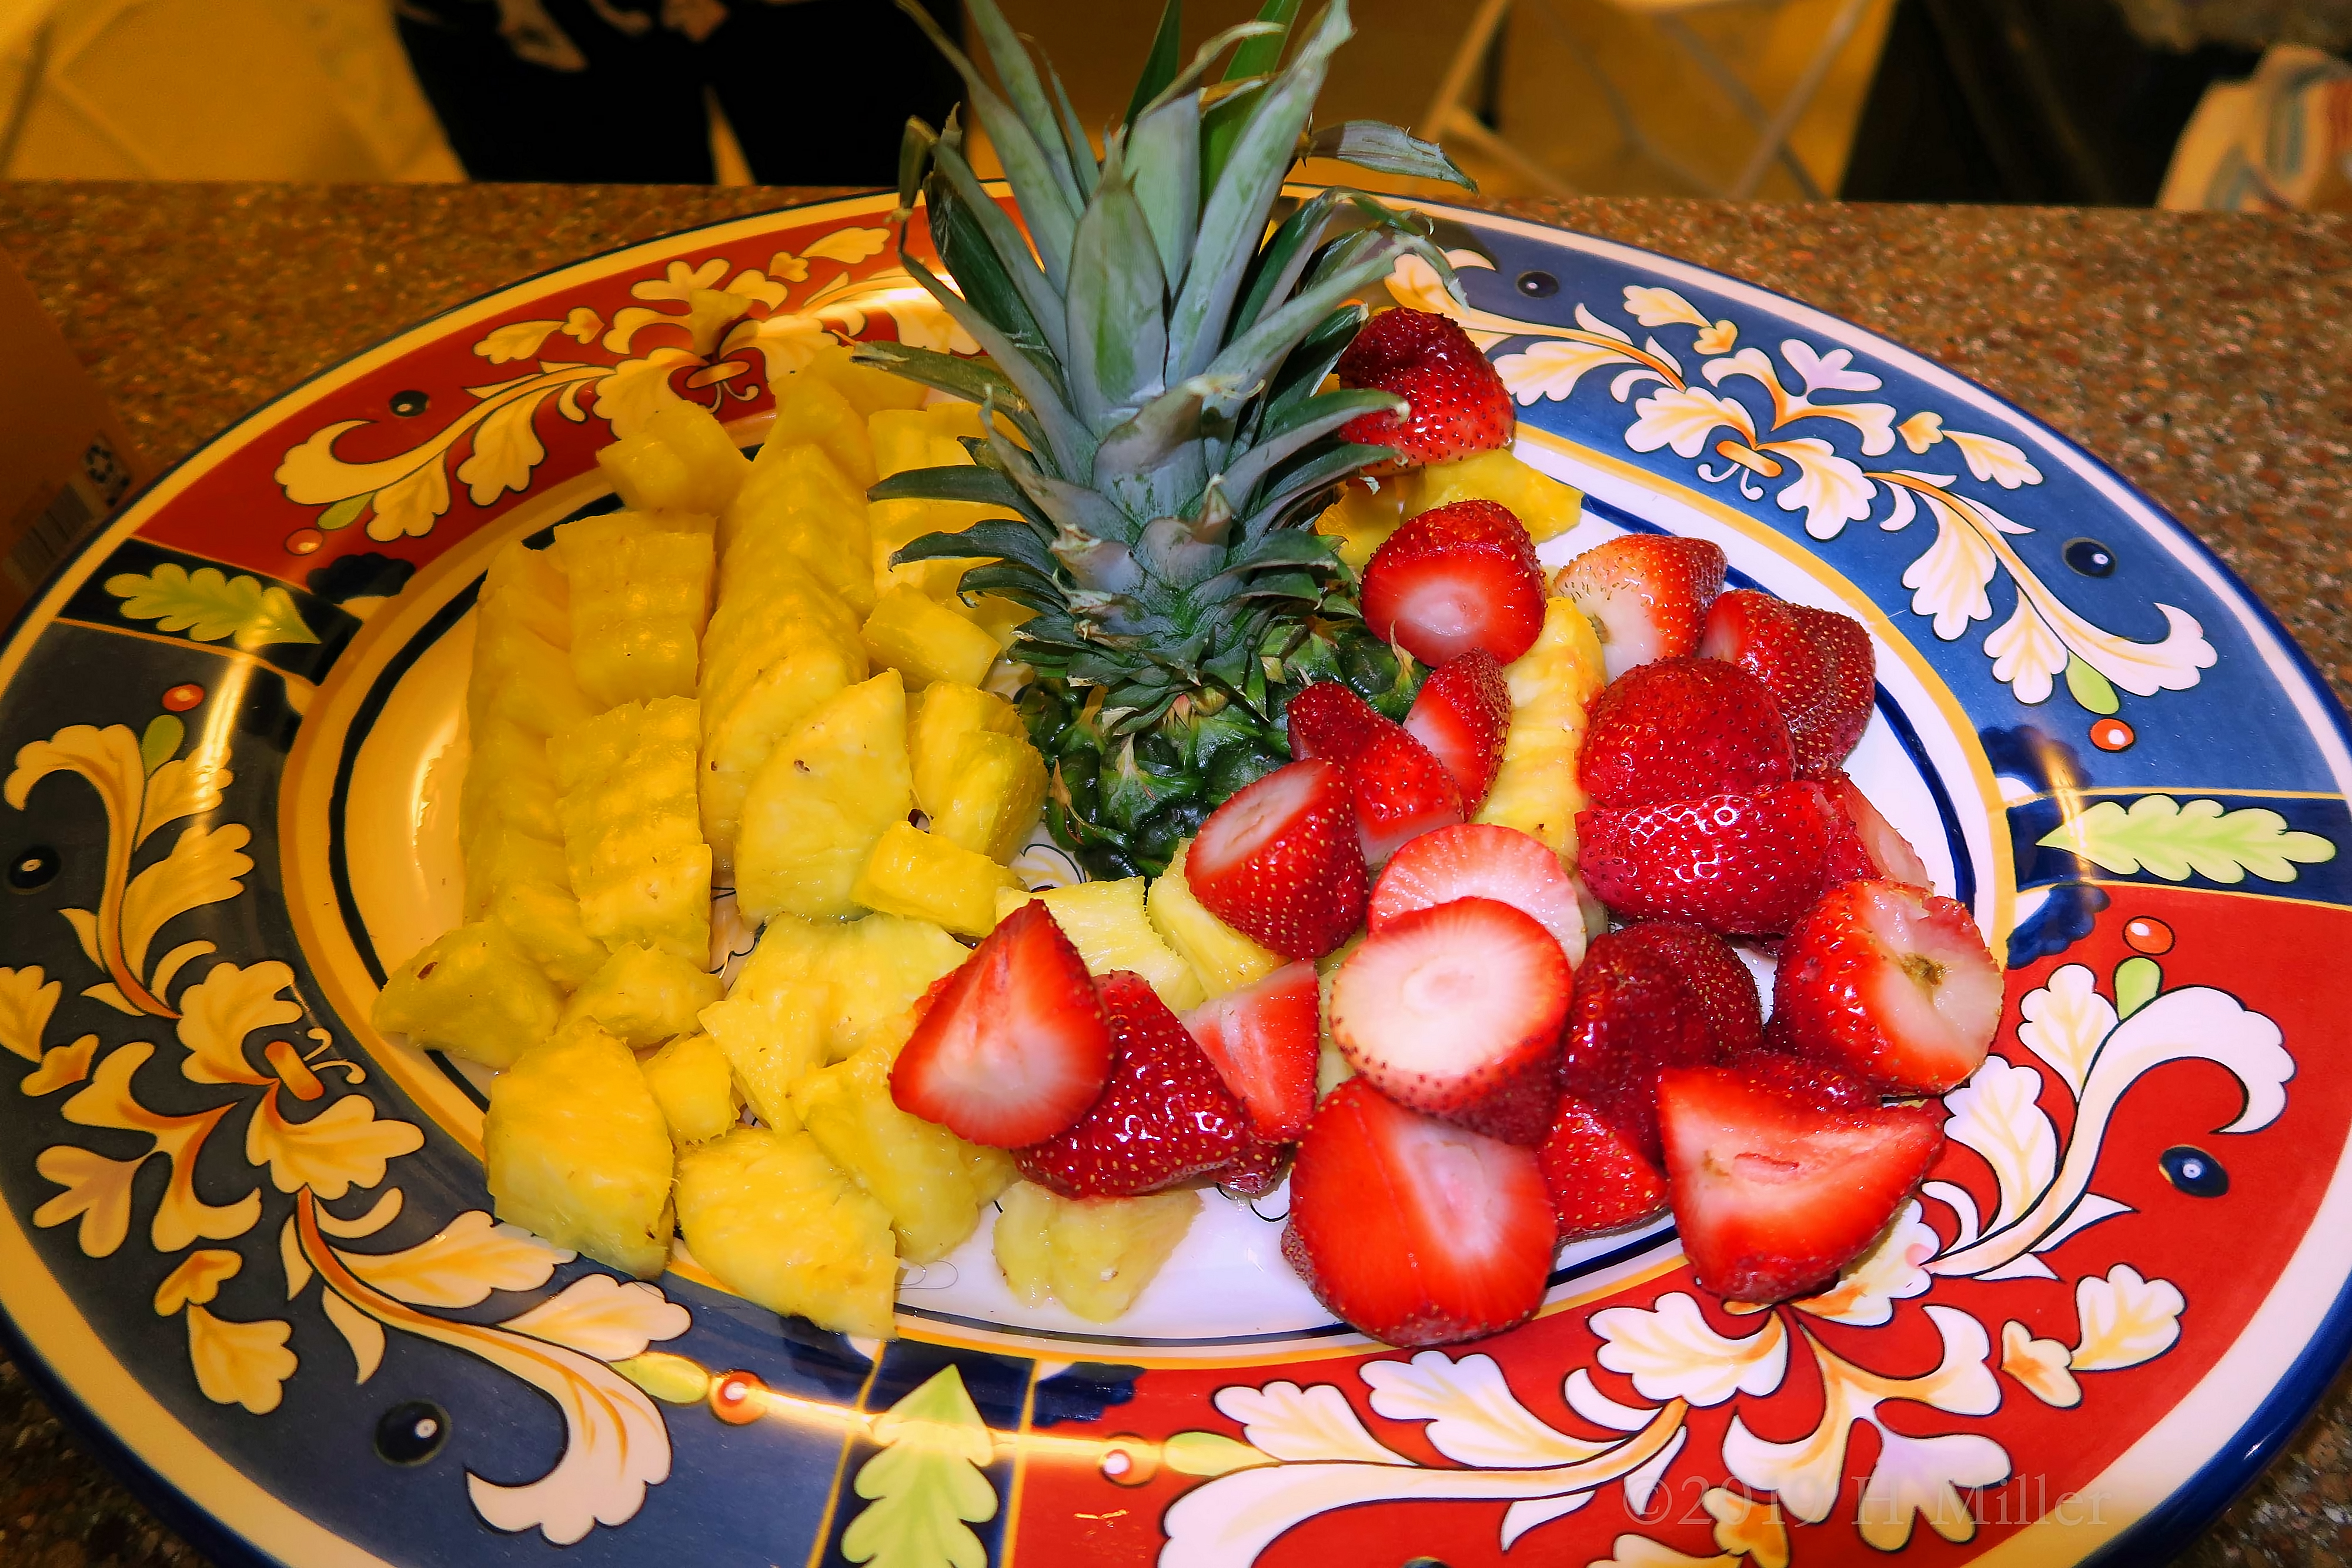 Wow! What An Appealing Red, Yellow, And Green Fruit Plate For Chocolate Fondue Dipping! 